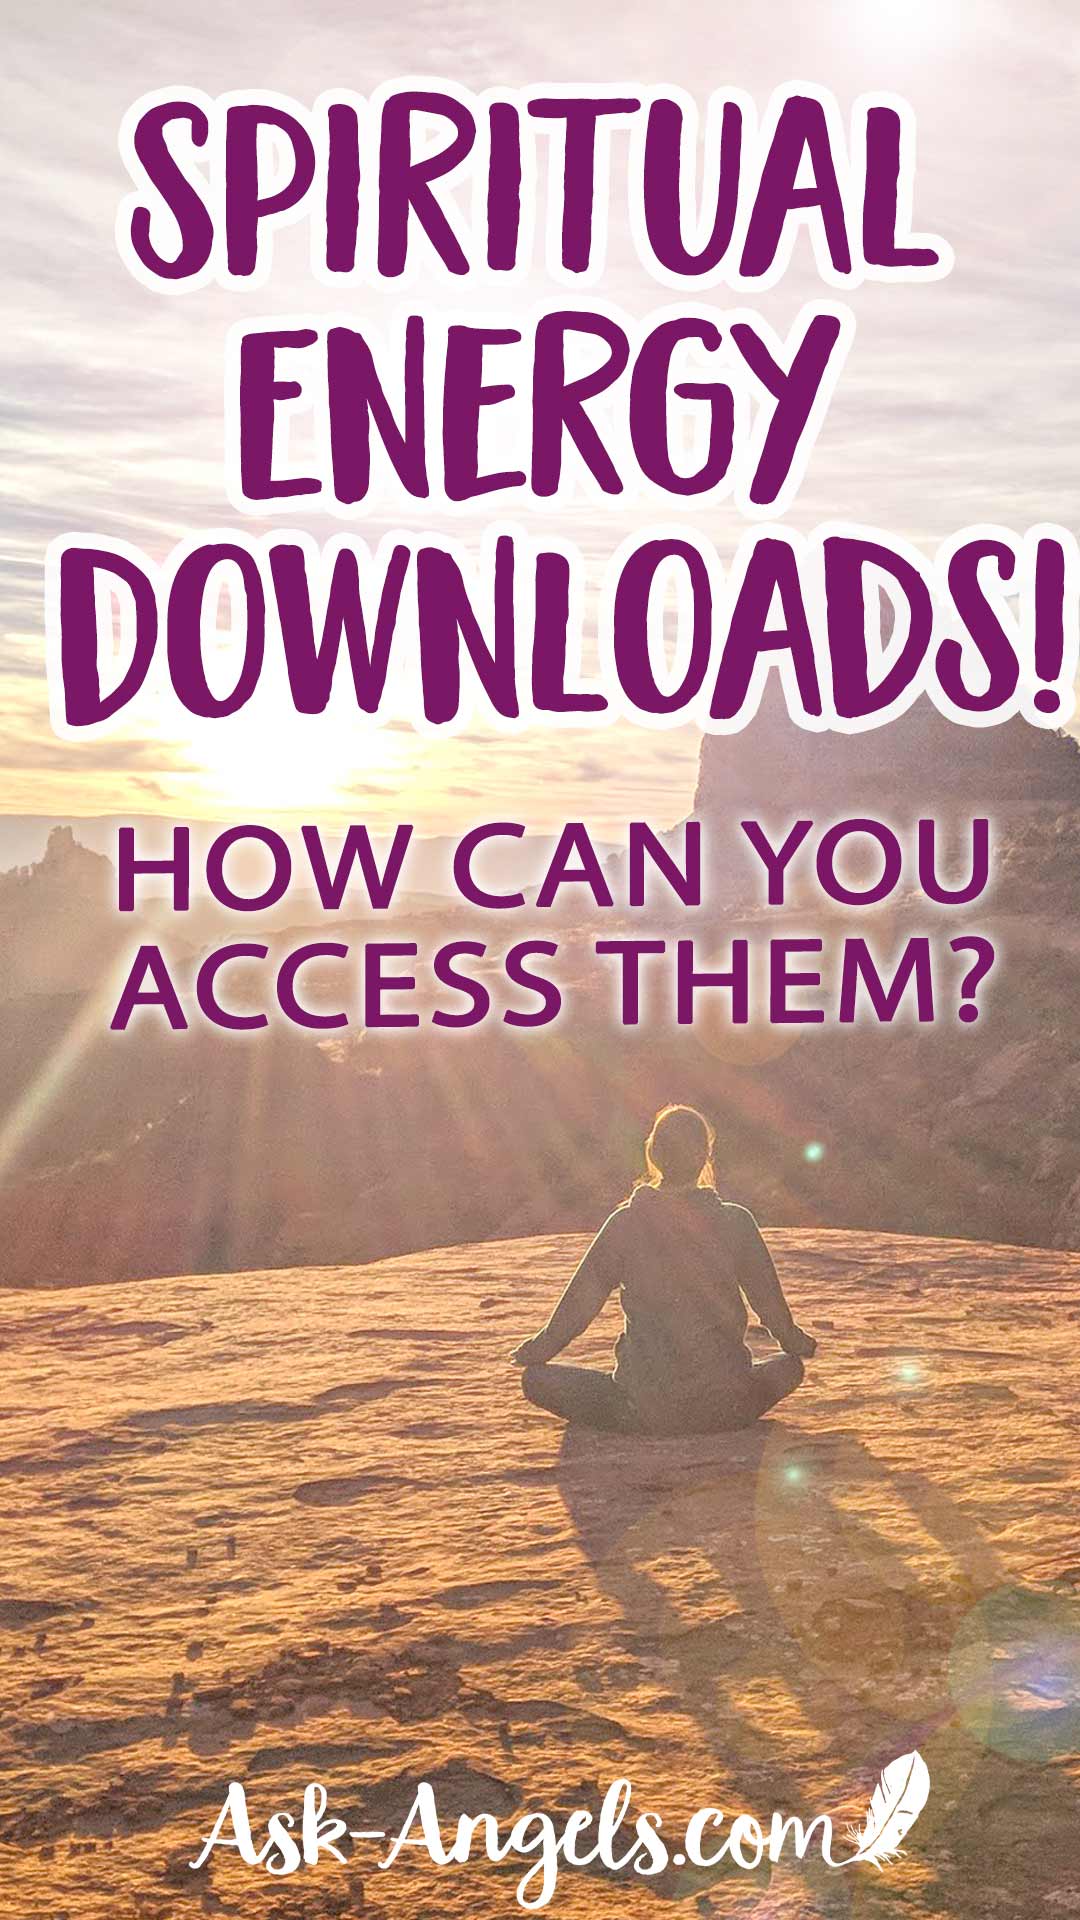 Spiritual Energy Downloads. What are they and how can you access them?